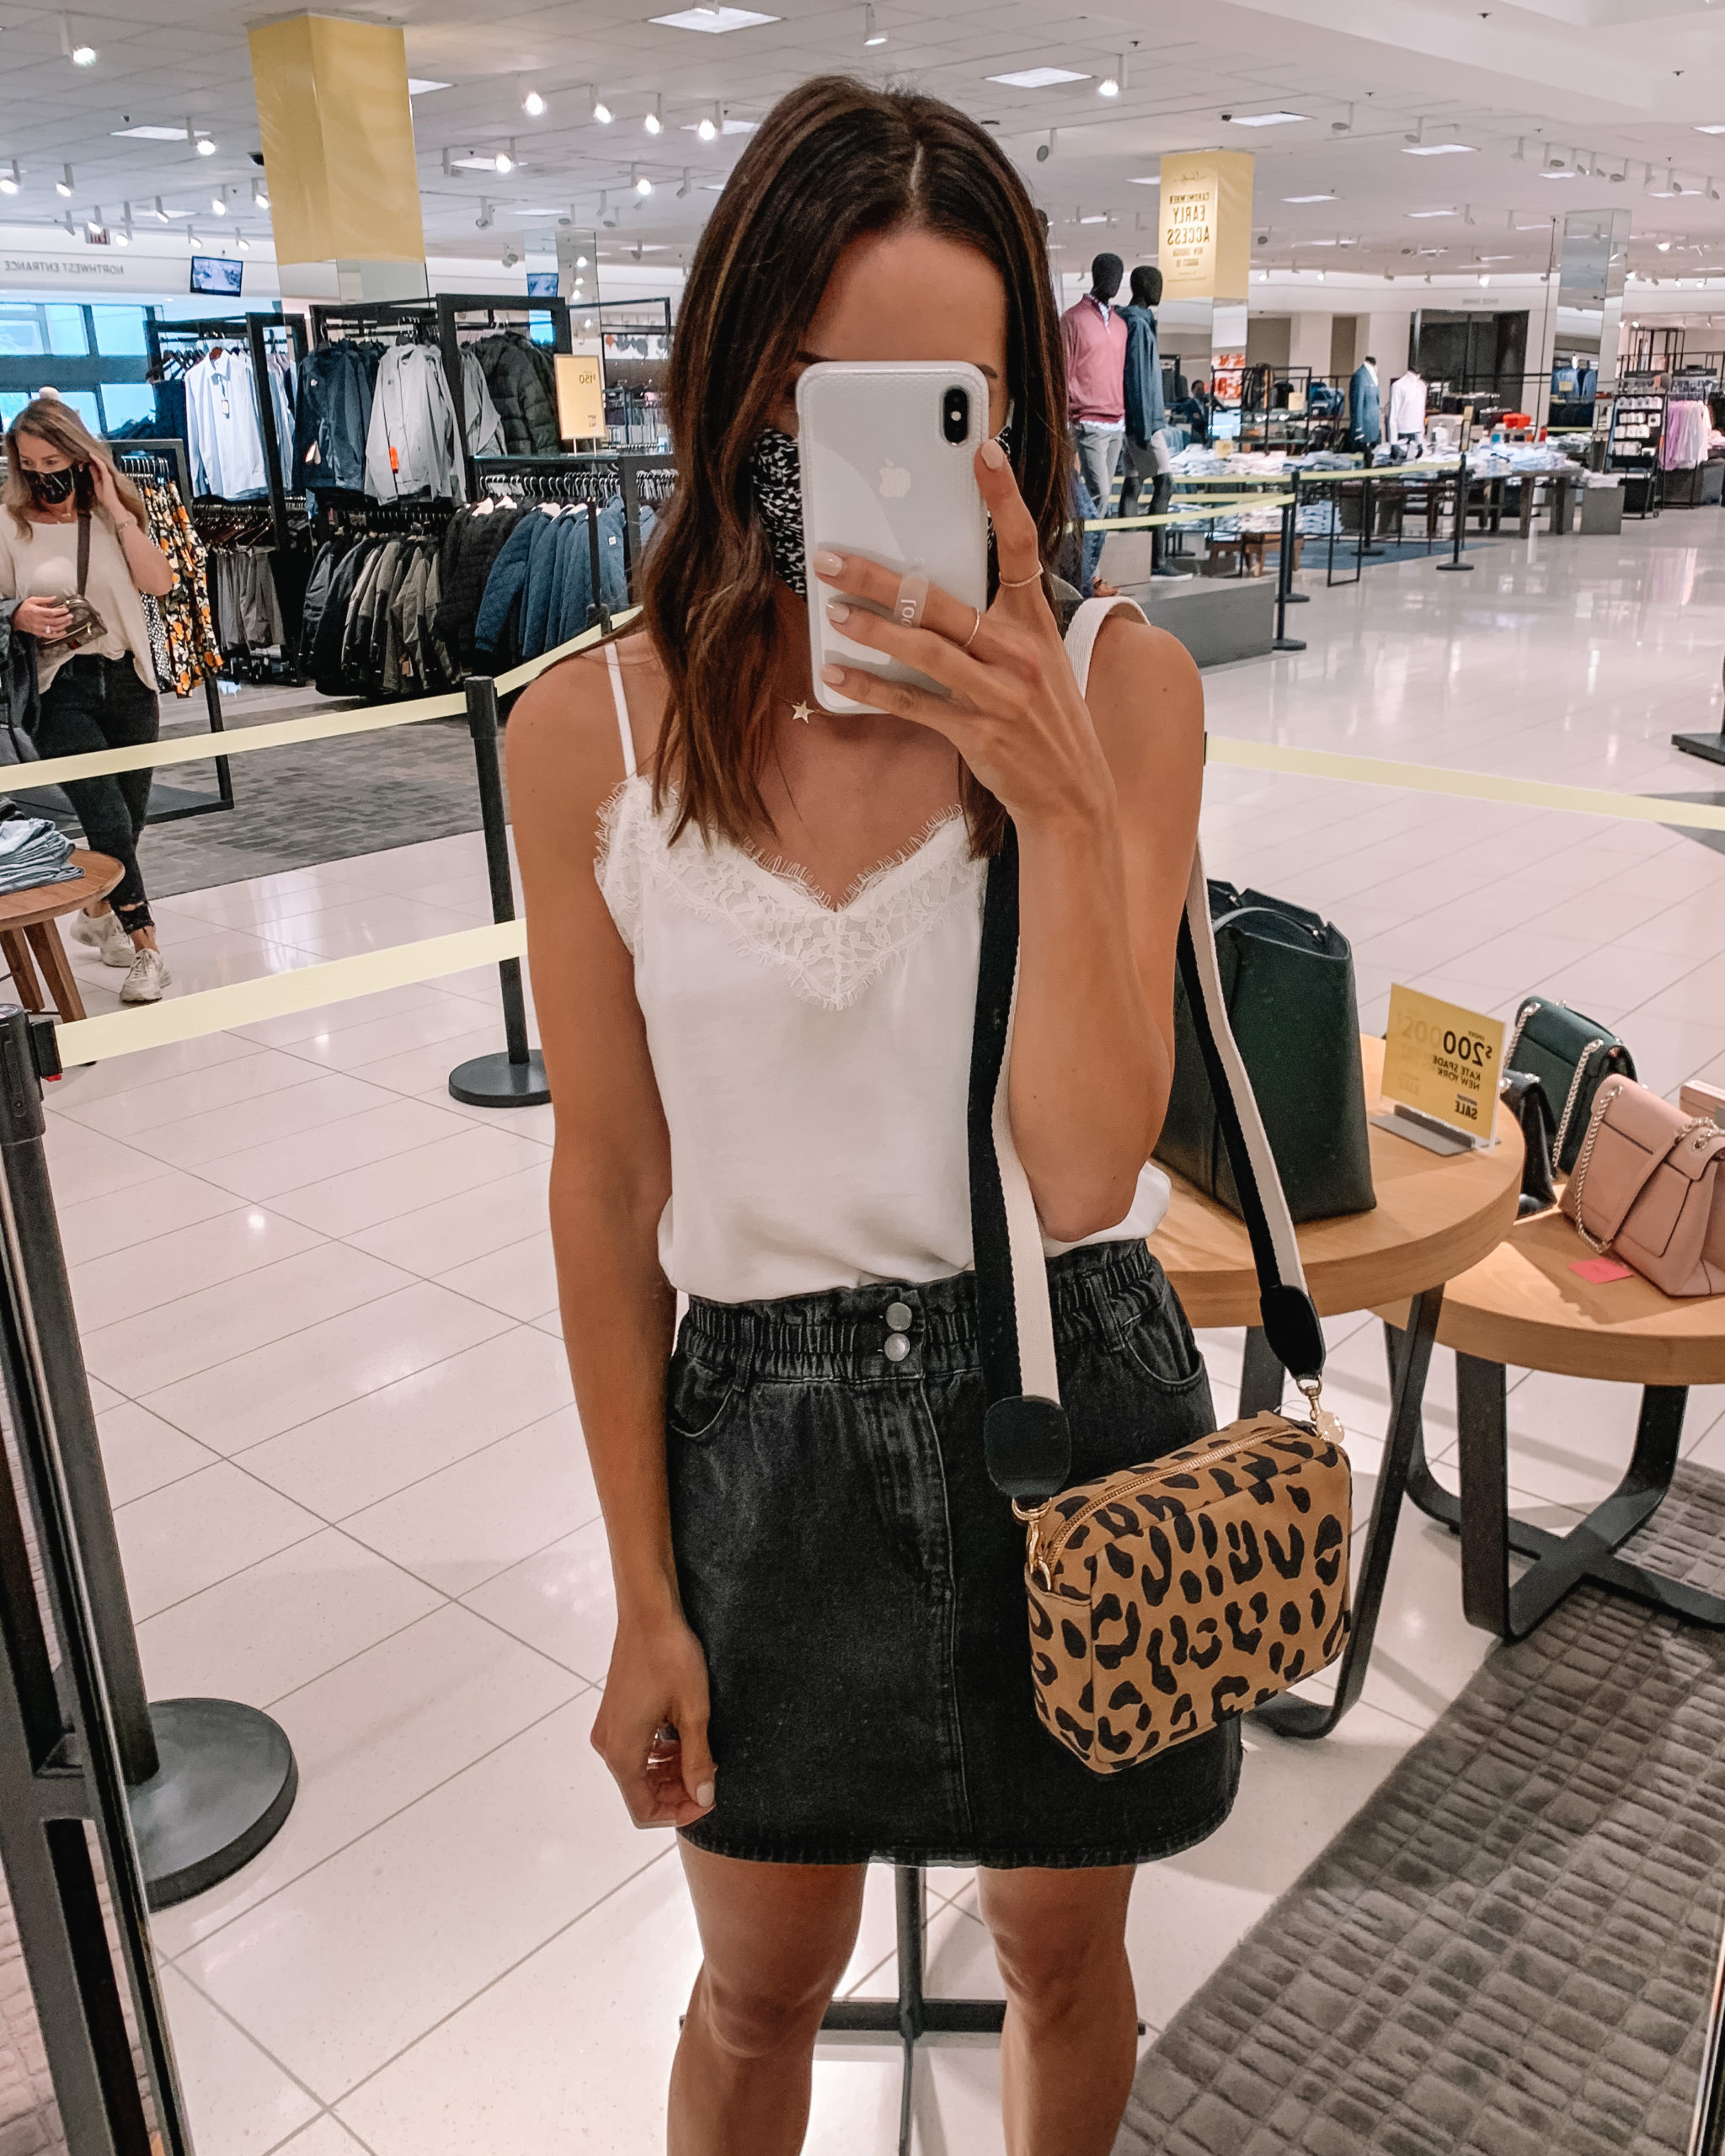 nsale-2020-nordstrom-anniversary-sale-try-on-clare-v-leopard-bag - The  Styled Press